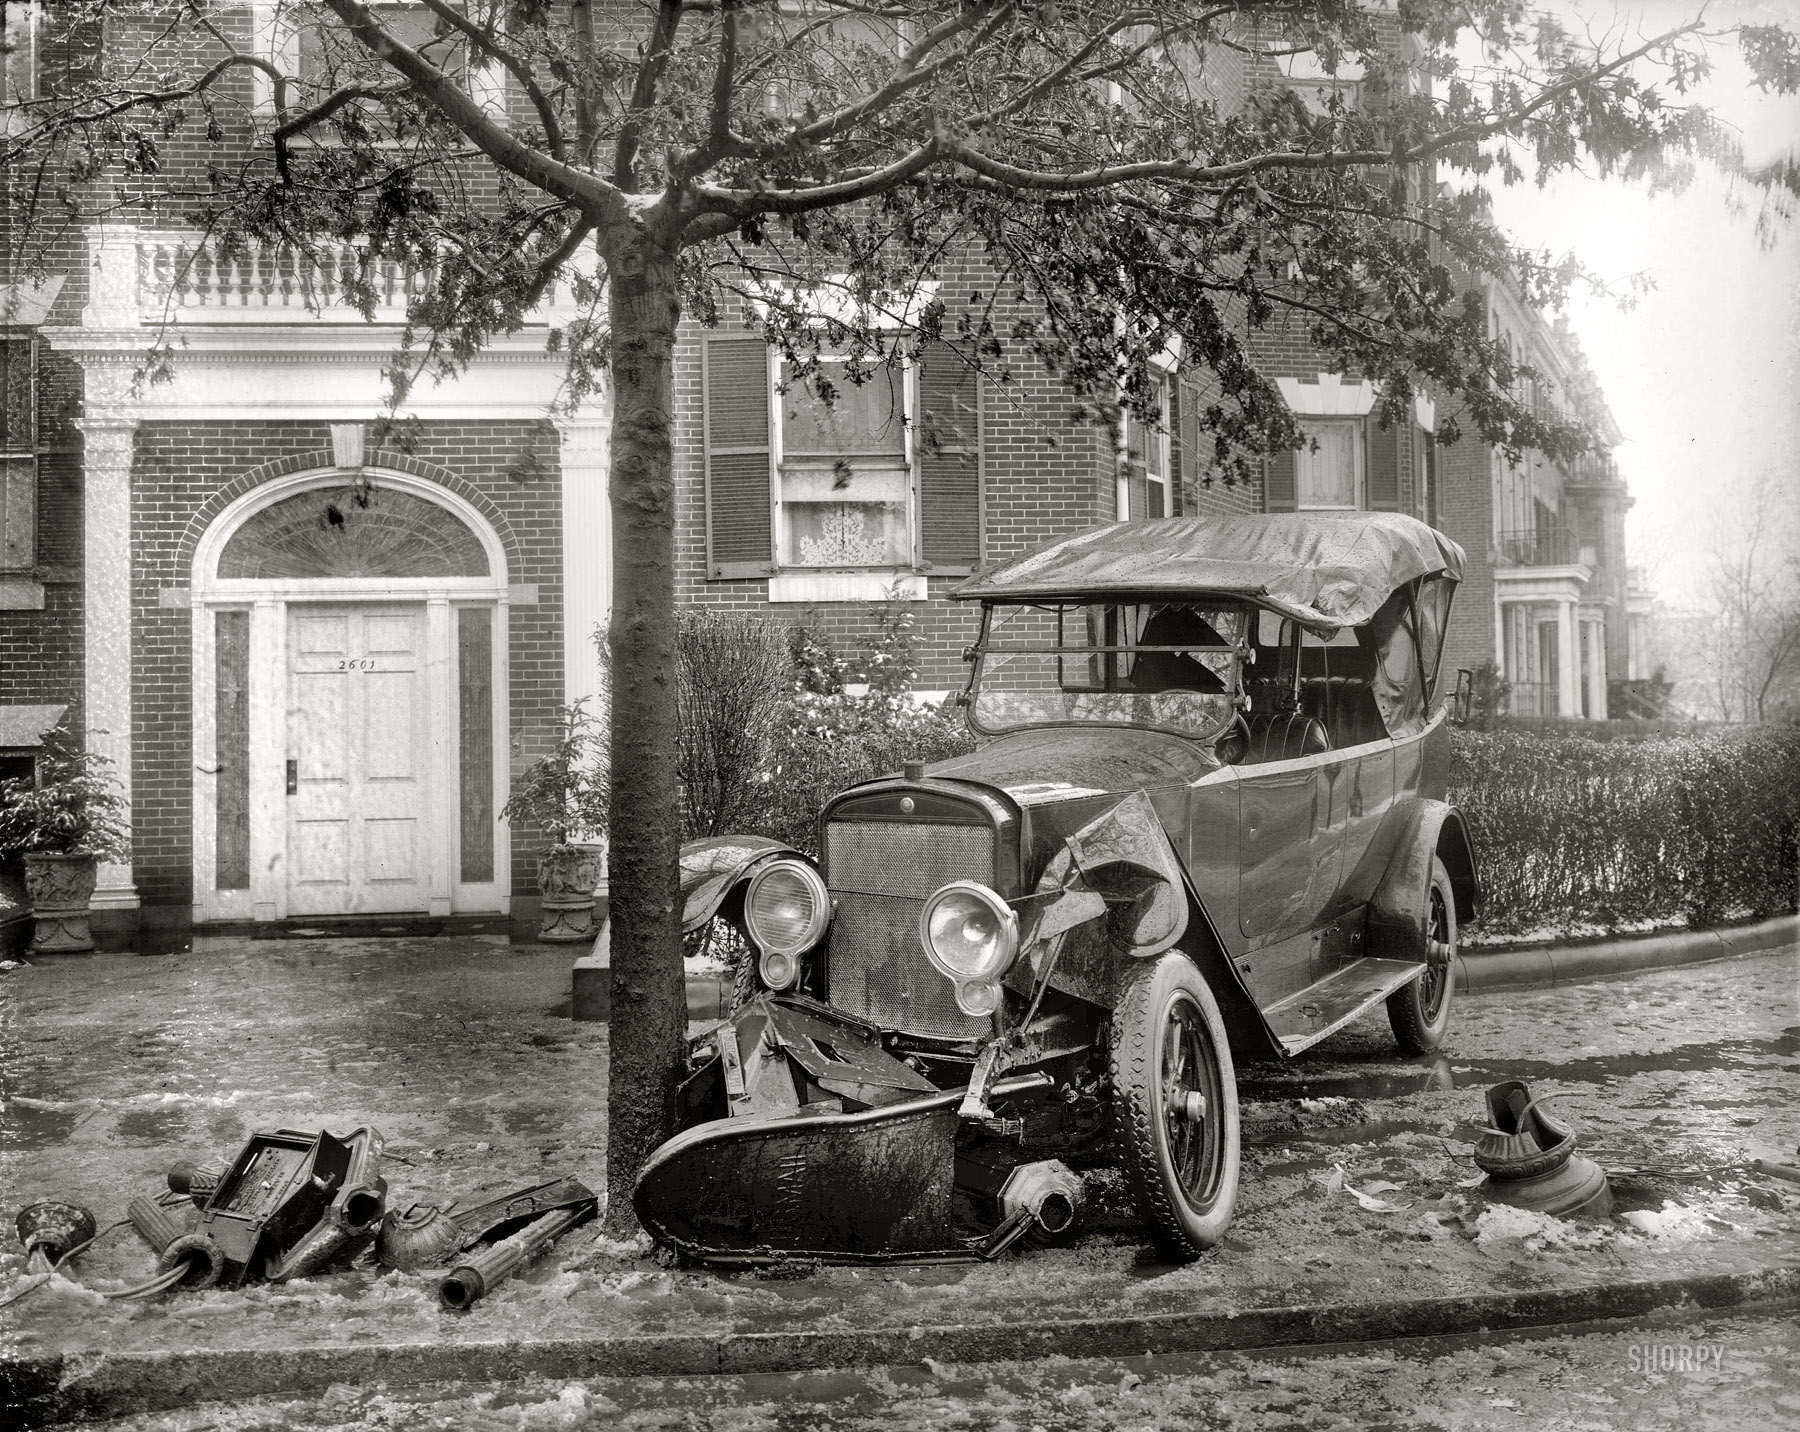 January 1921. Washington, D.C. "Penrose car, accident." Beside Senator Boies Penrose's car, casualties here include a mailbox, emergency call box and a lamppost. The tree survives with a dented trunk. View full size.